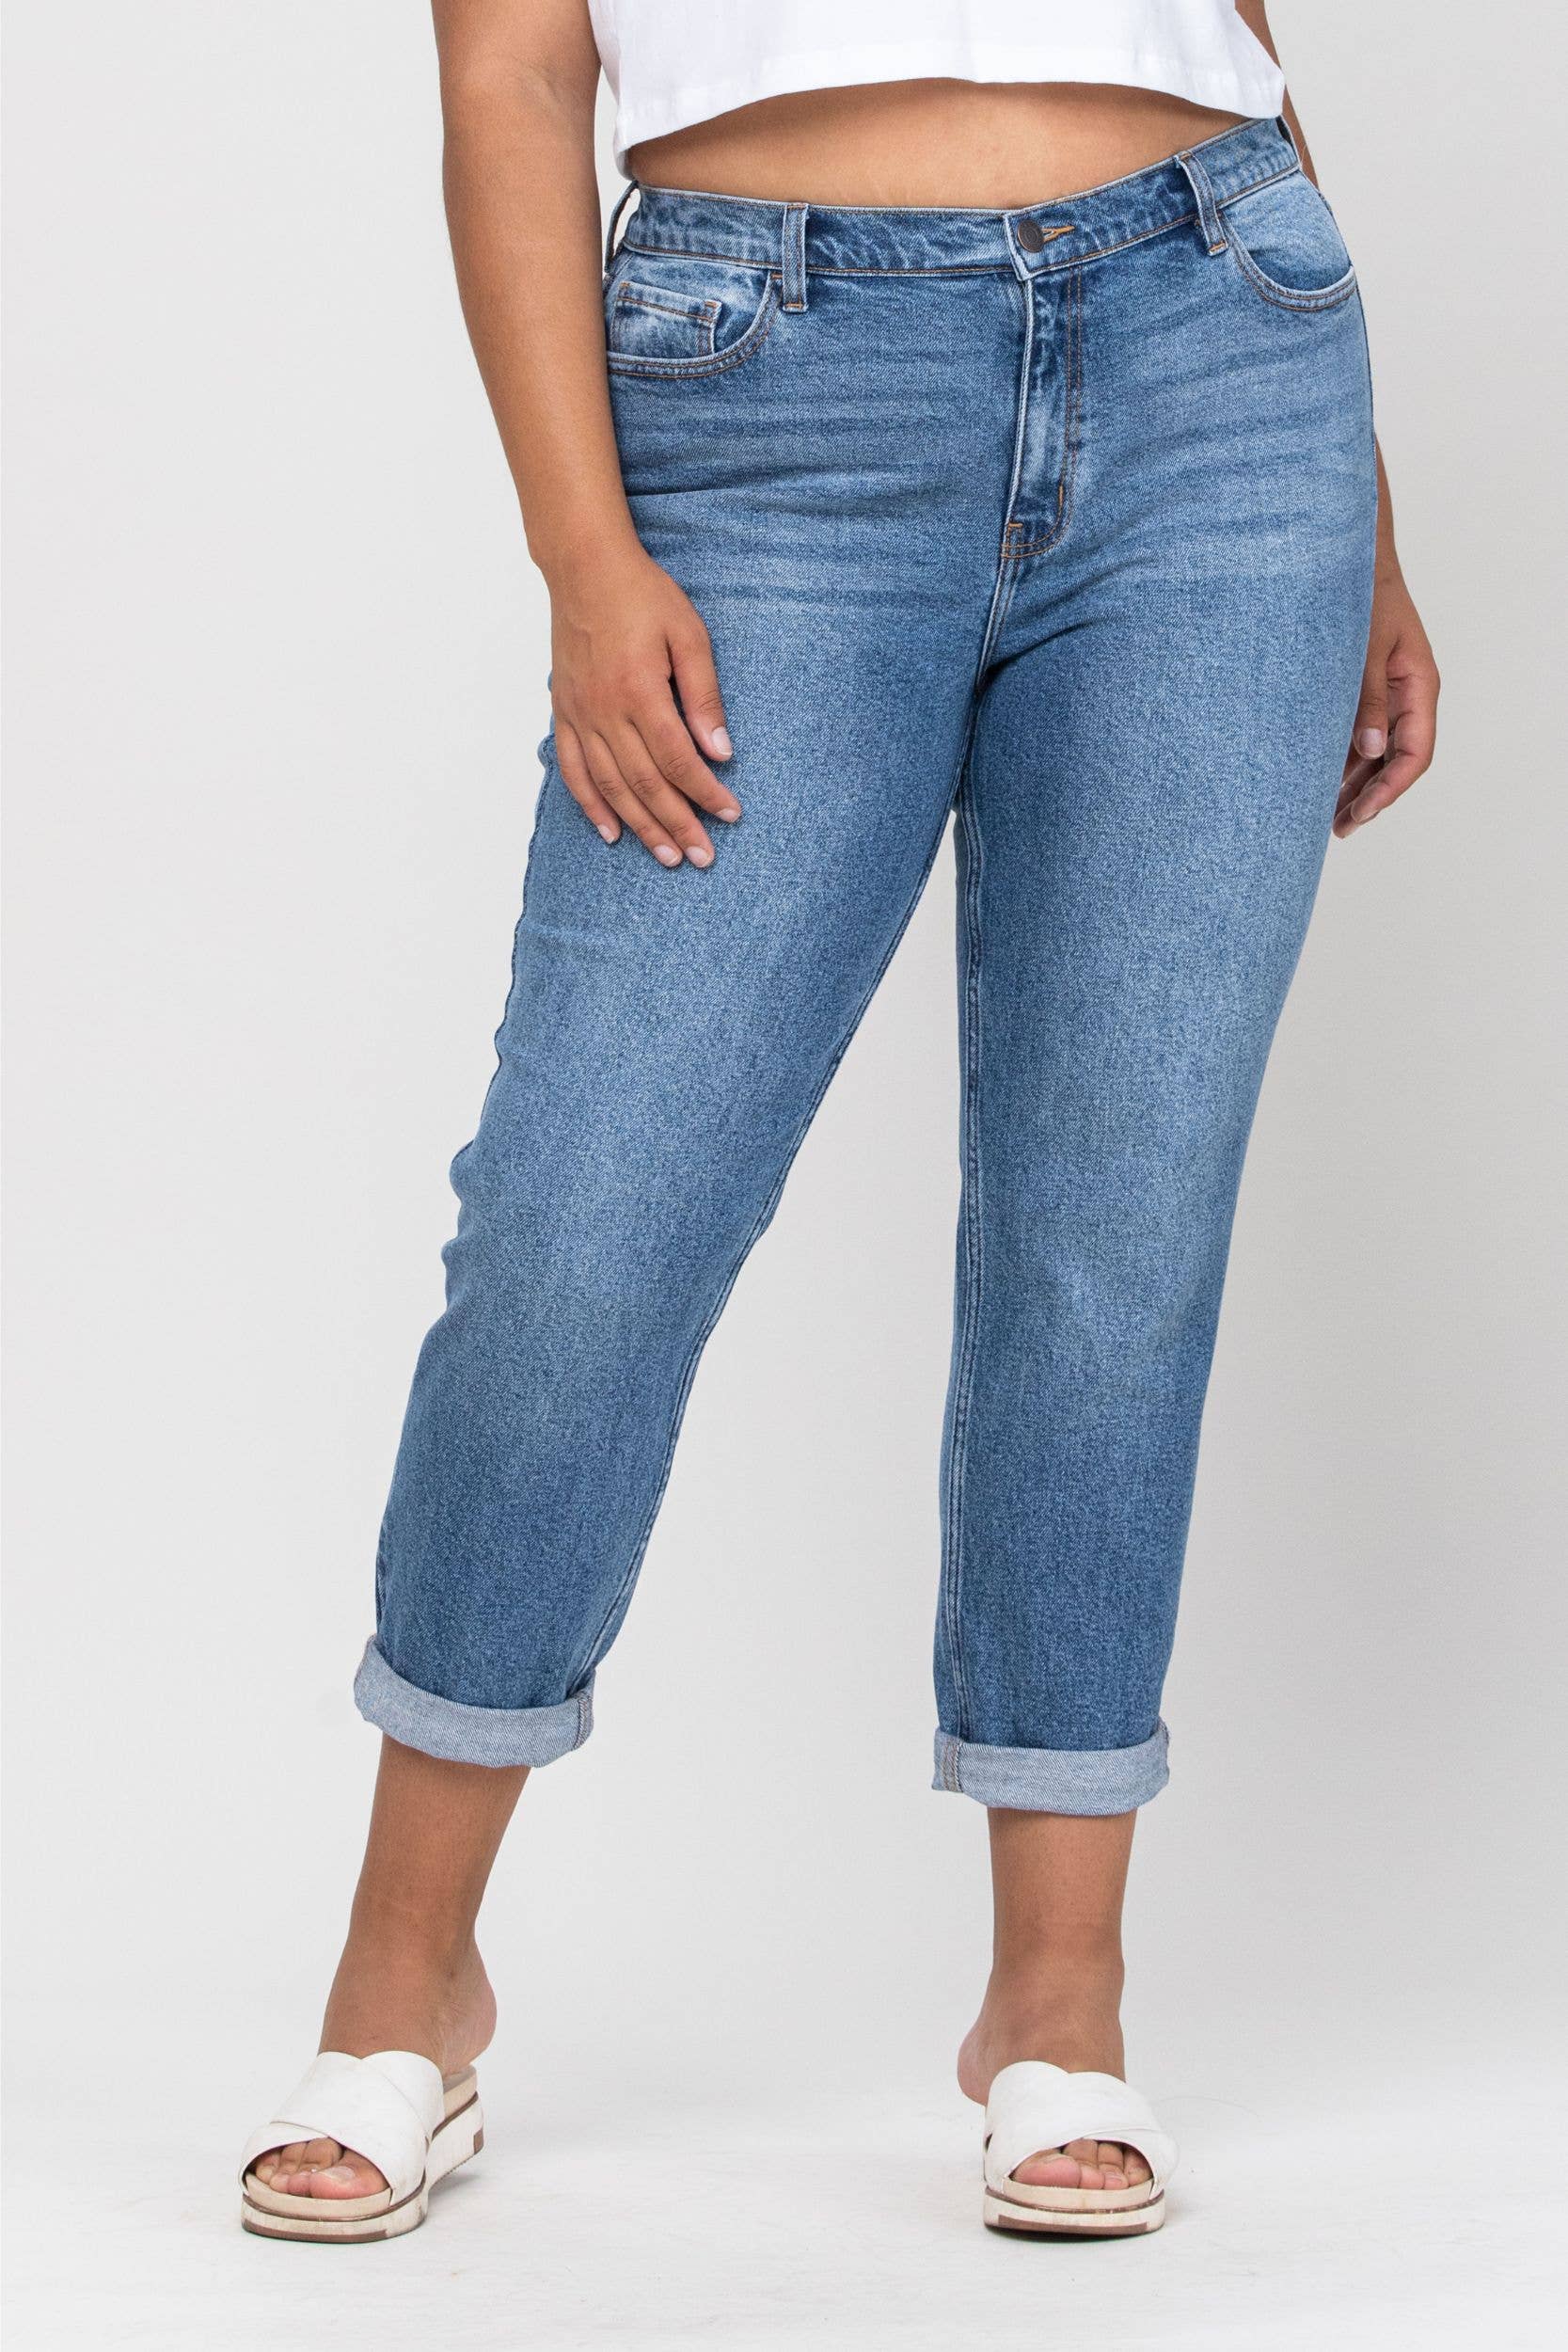 Could This Be Love Jeans